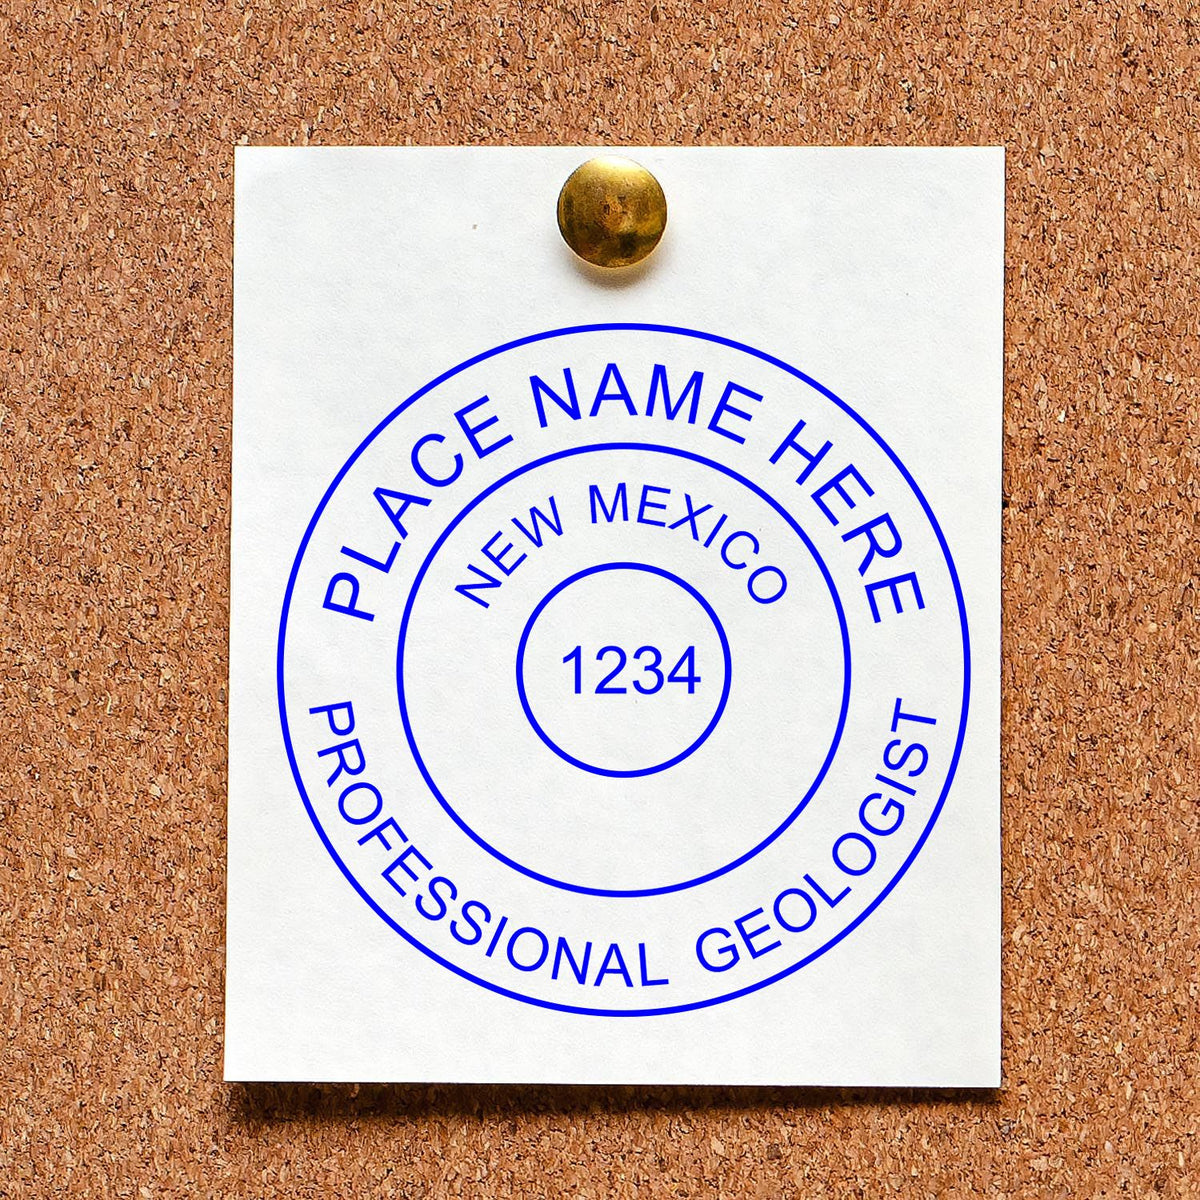 The Slim Pre-Inked New Mexico Professional Geologist Seal Stamp stamp impression comes to life with a crisp, detailed image stamped on paper - showcasing true professional quality.